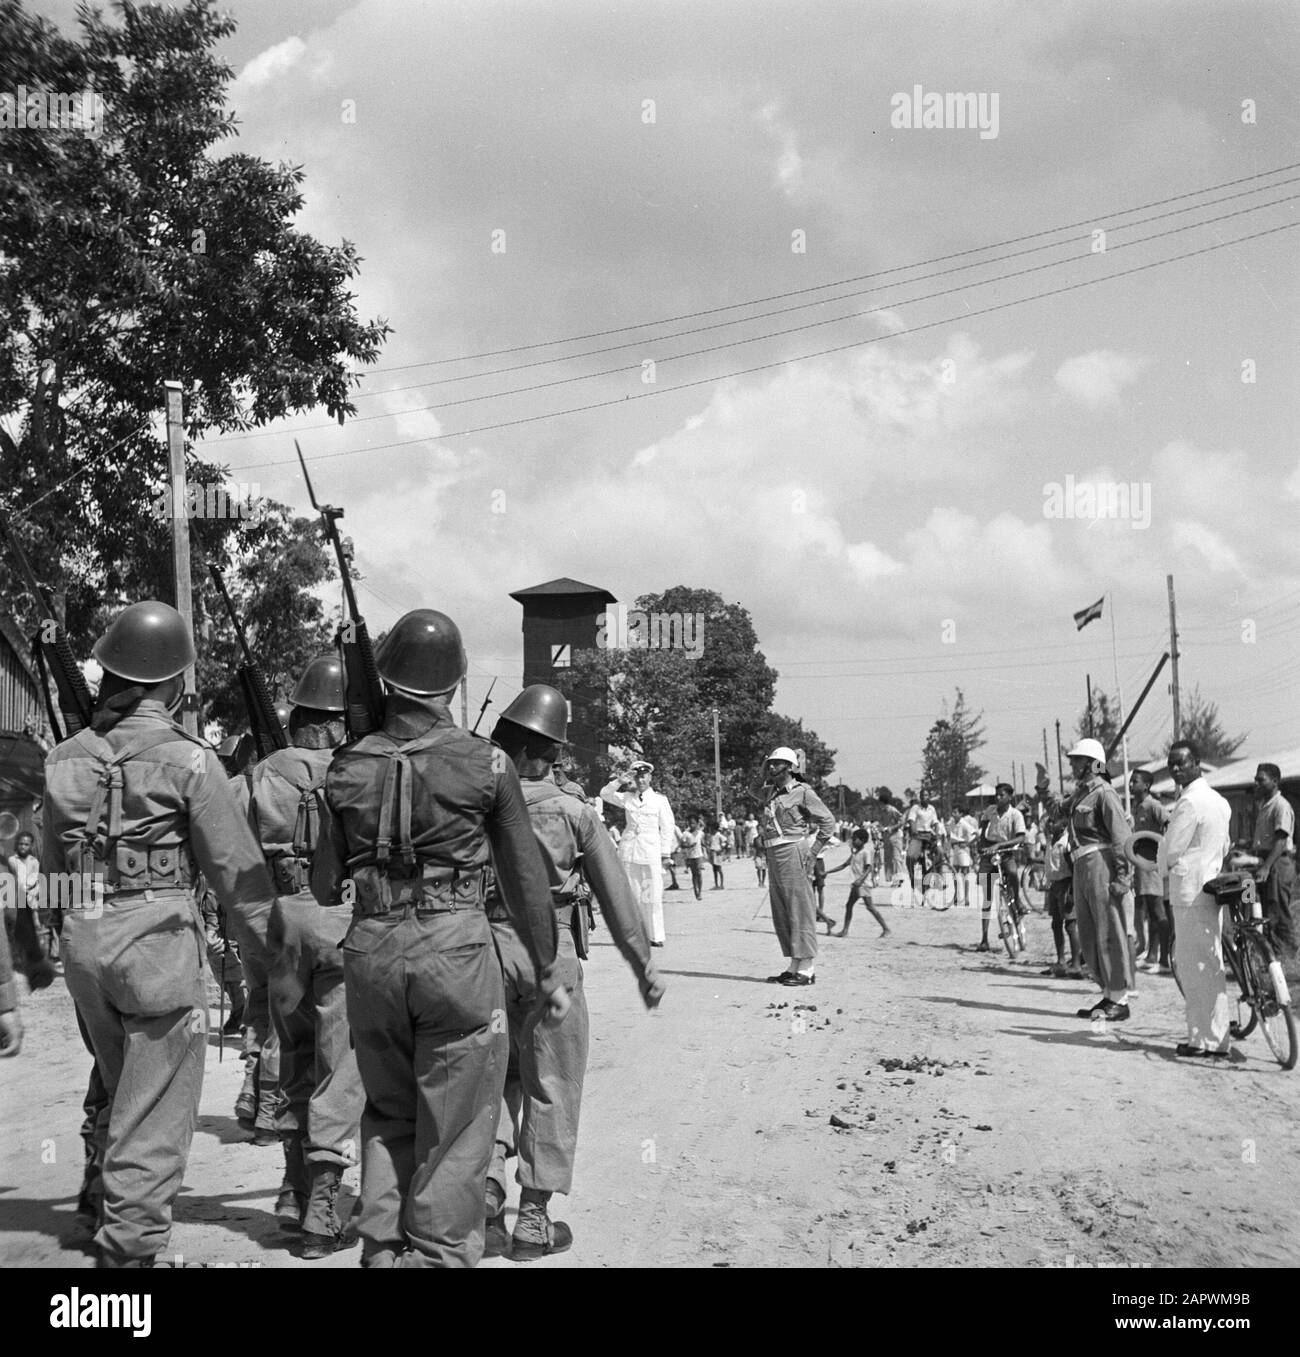 Travel to Suriname and the Netherlands Antilles  Miltaire parade in Paramaribo Date: 1947 Location: Paramaribo, Suriname Keywords: military parades, military Stock Photo